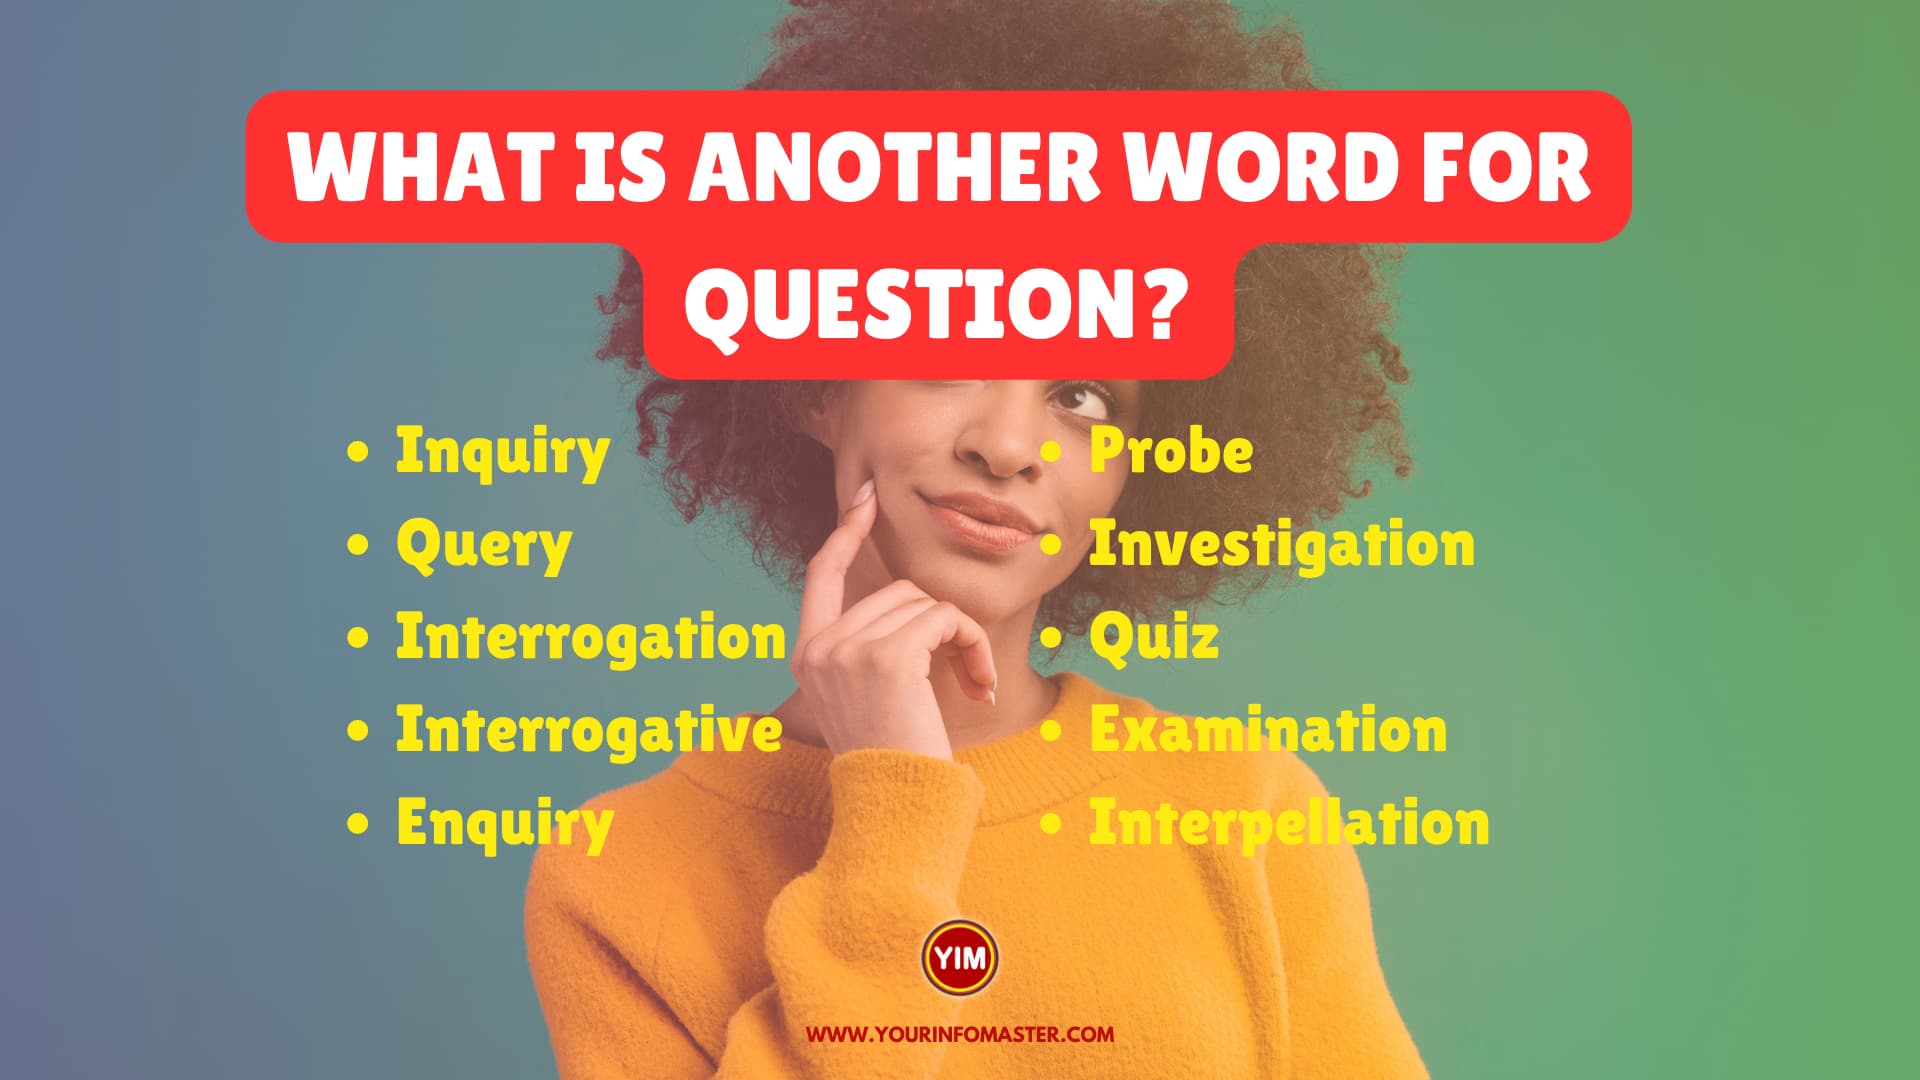 What is another word for Question